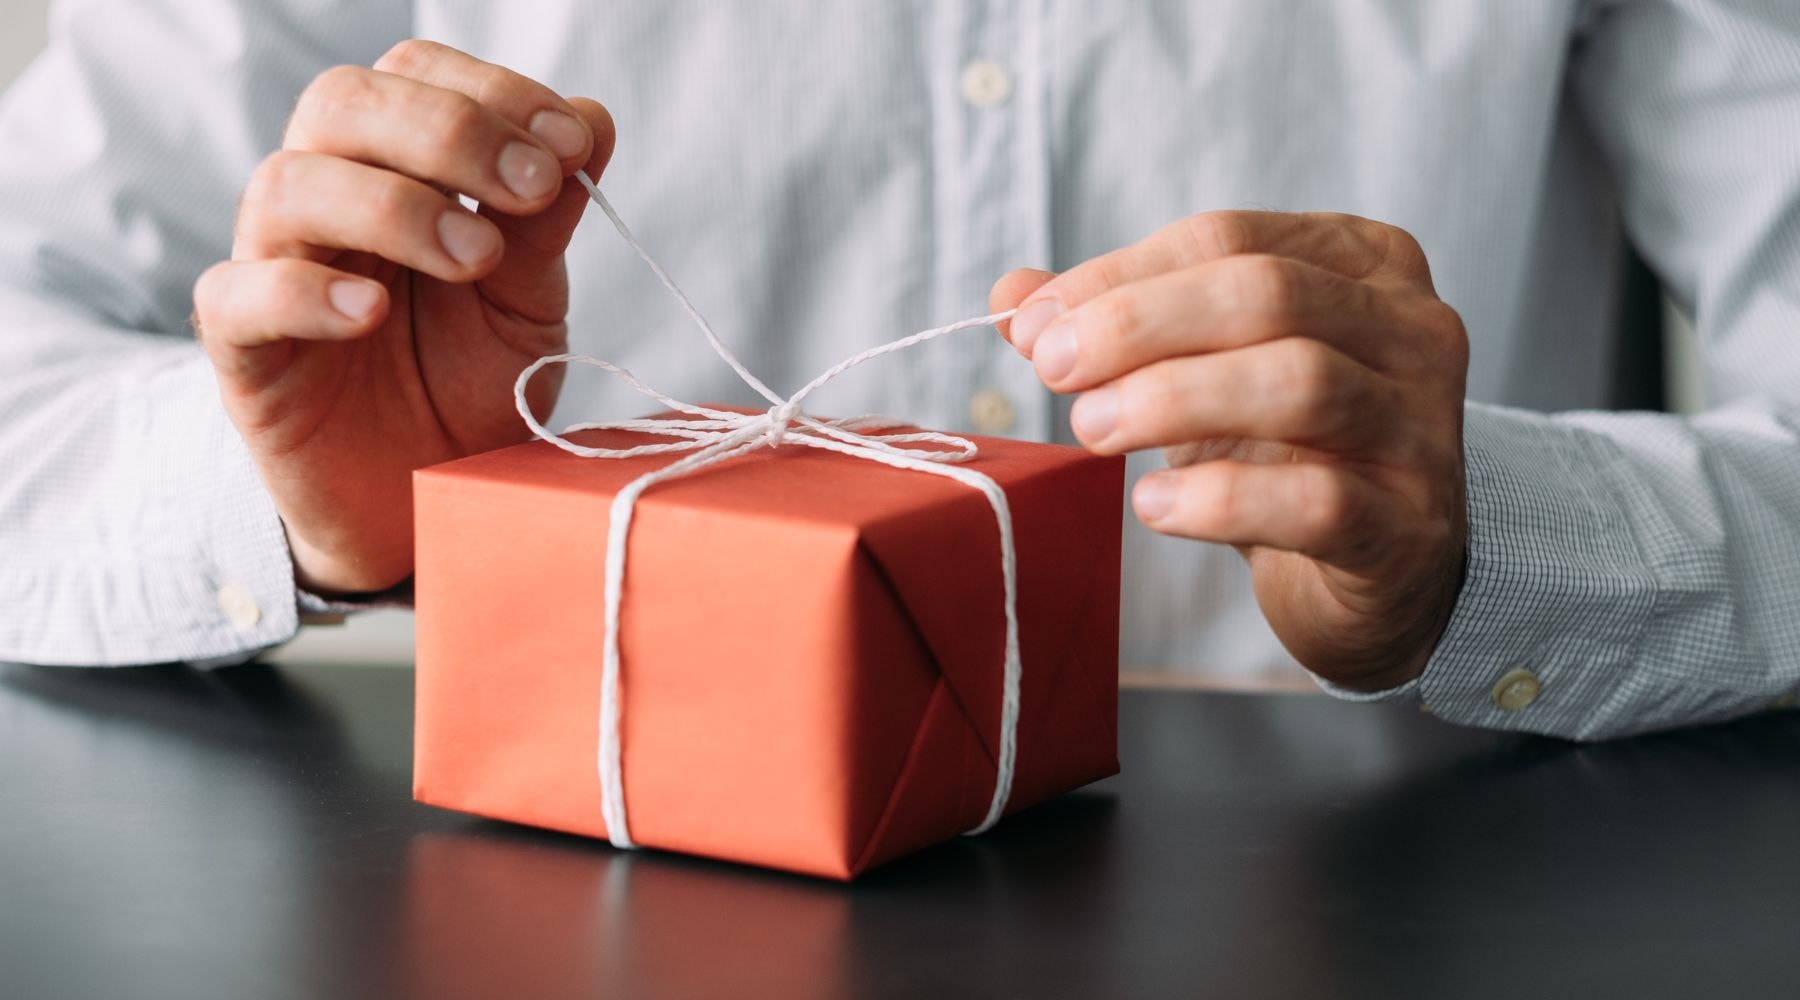 Close-up of a person tying a white string around a small red gift box on a dark desk